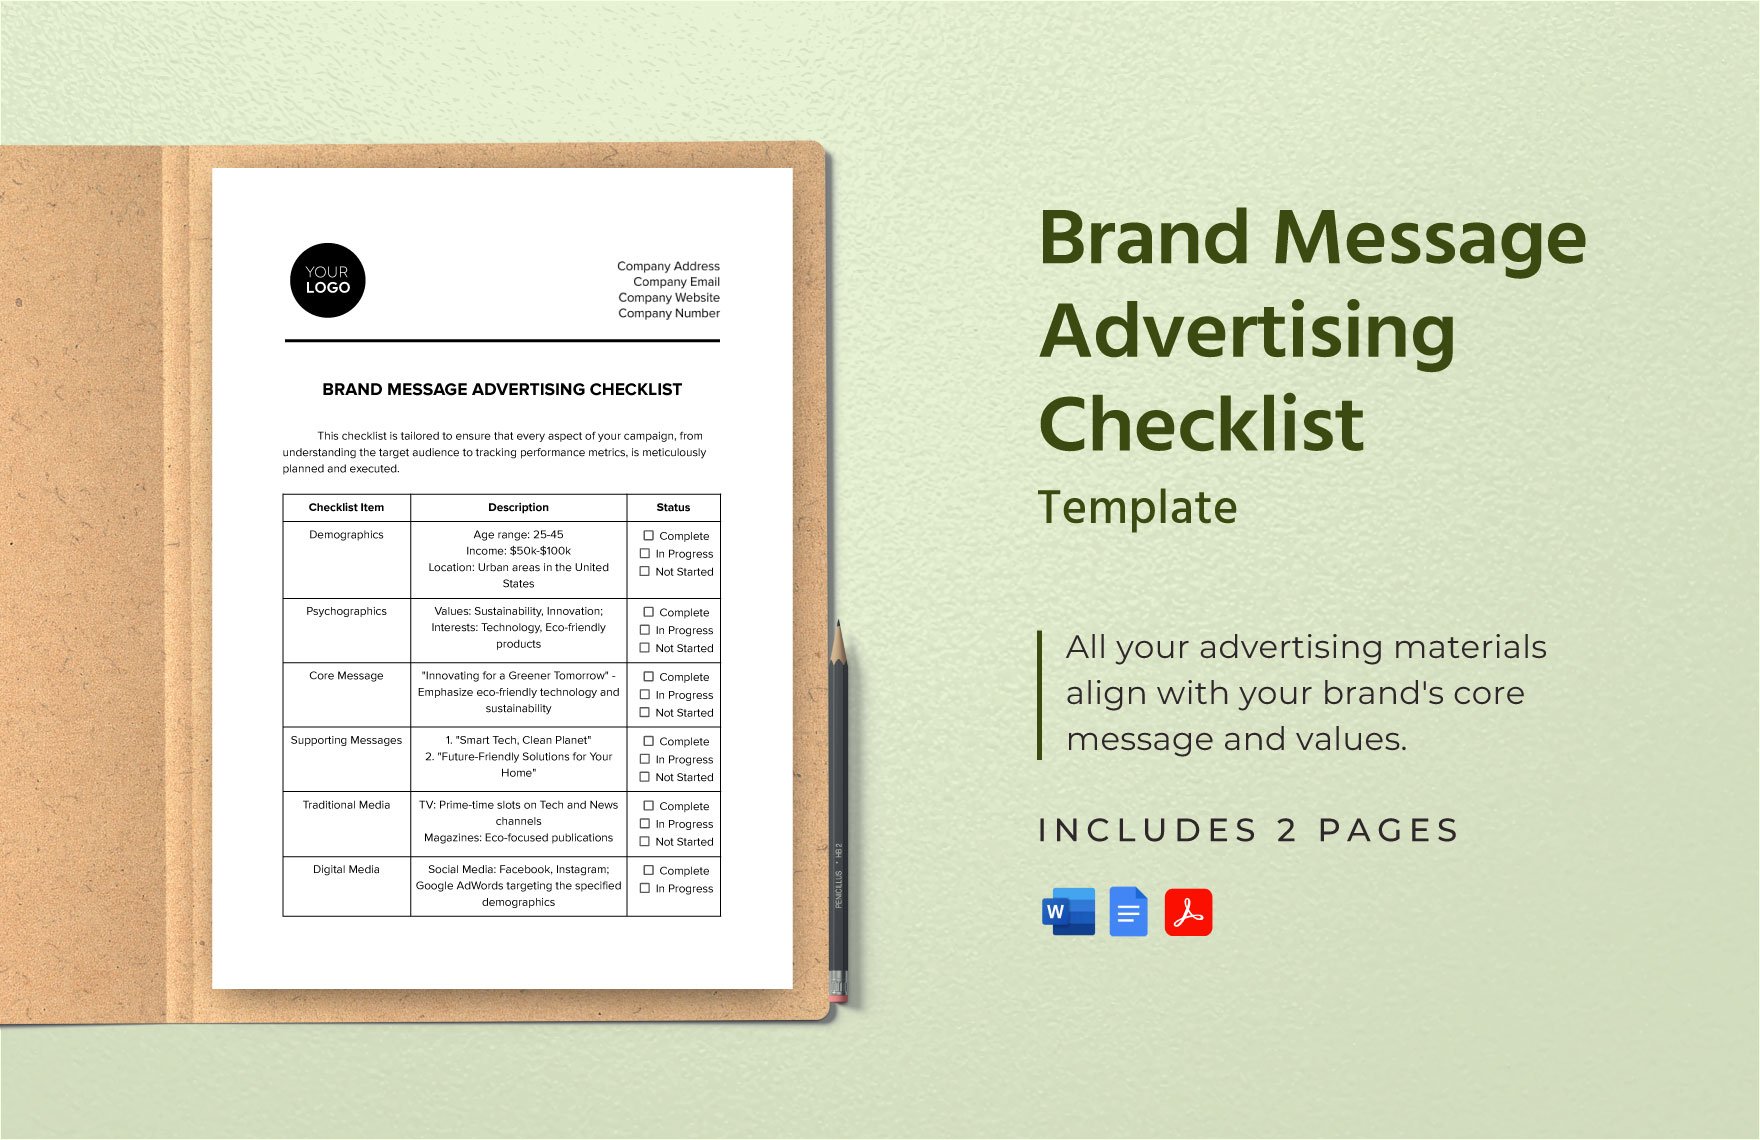 Brand Message Advertising Checklist Template in Word, Google Docs, PDF